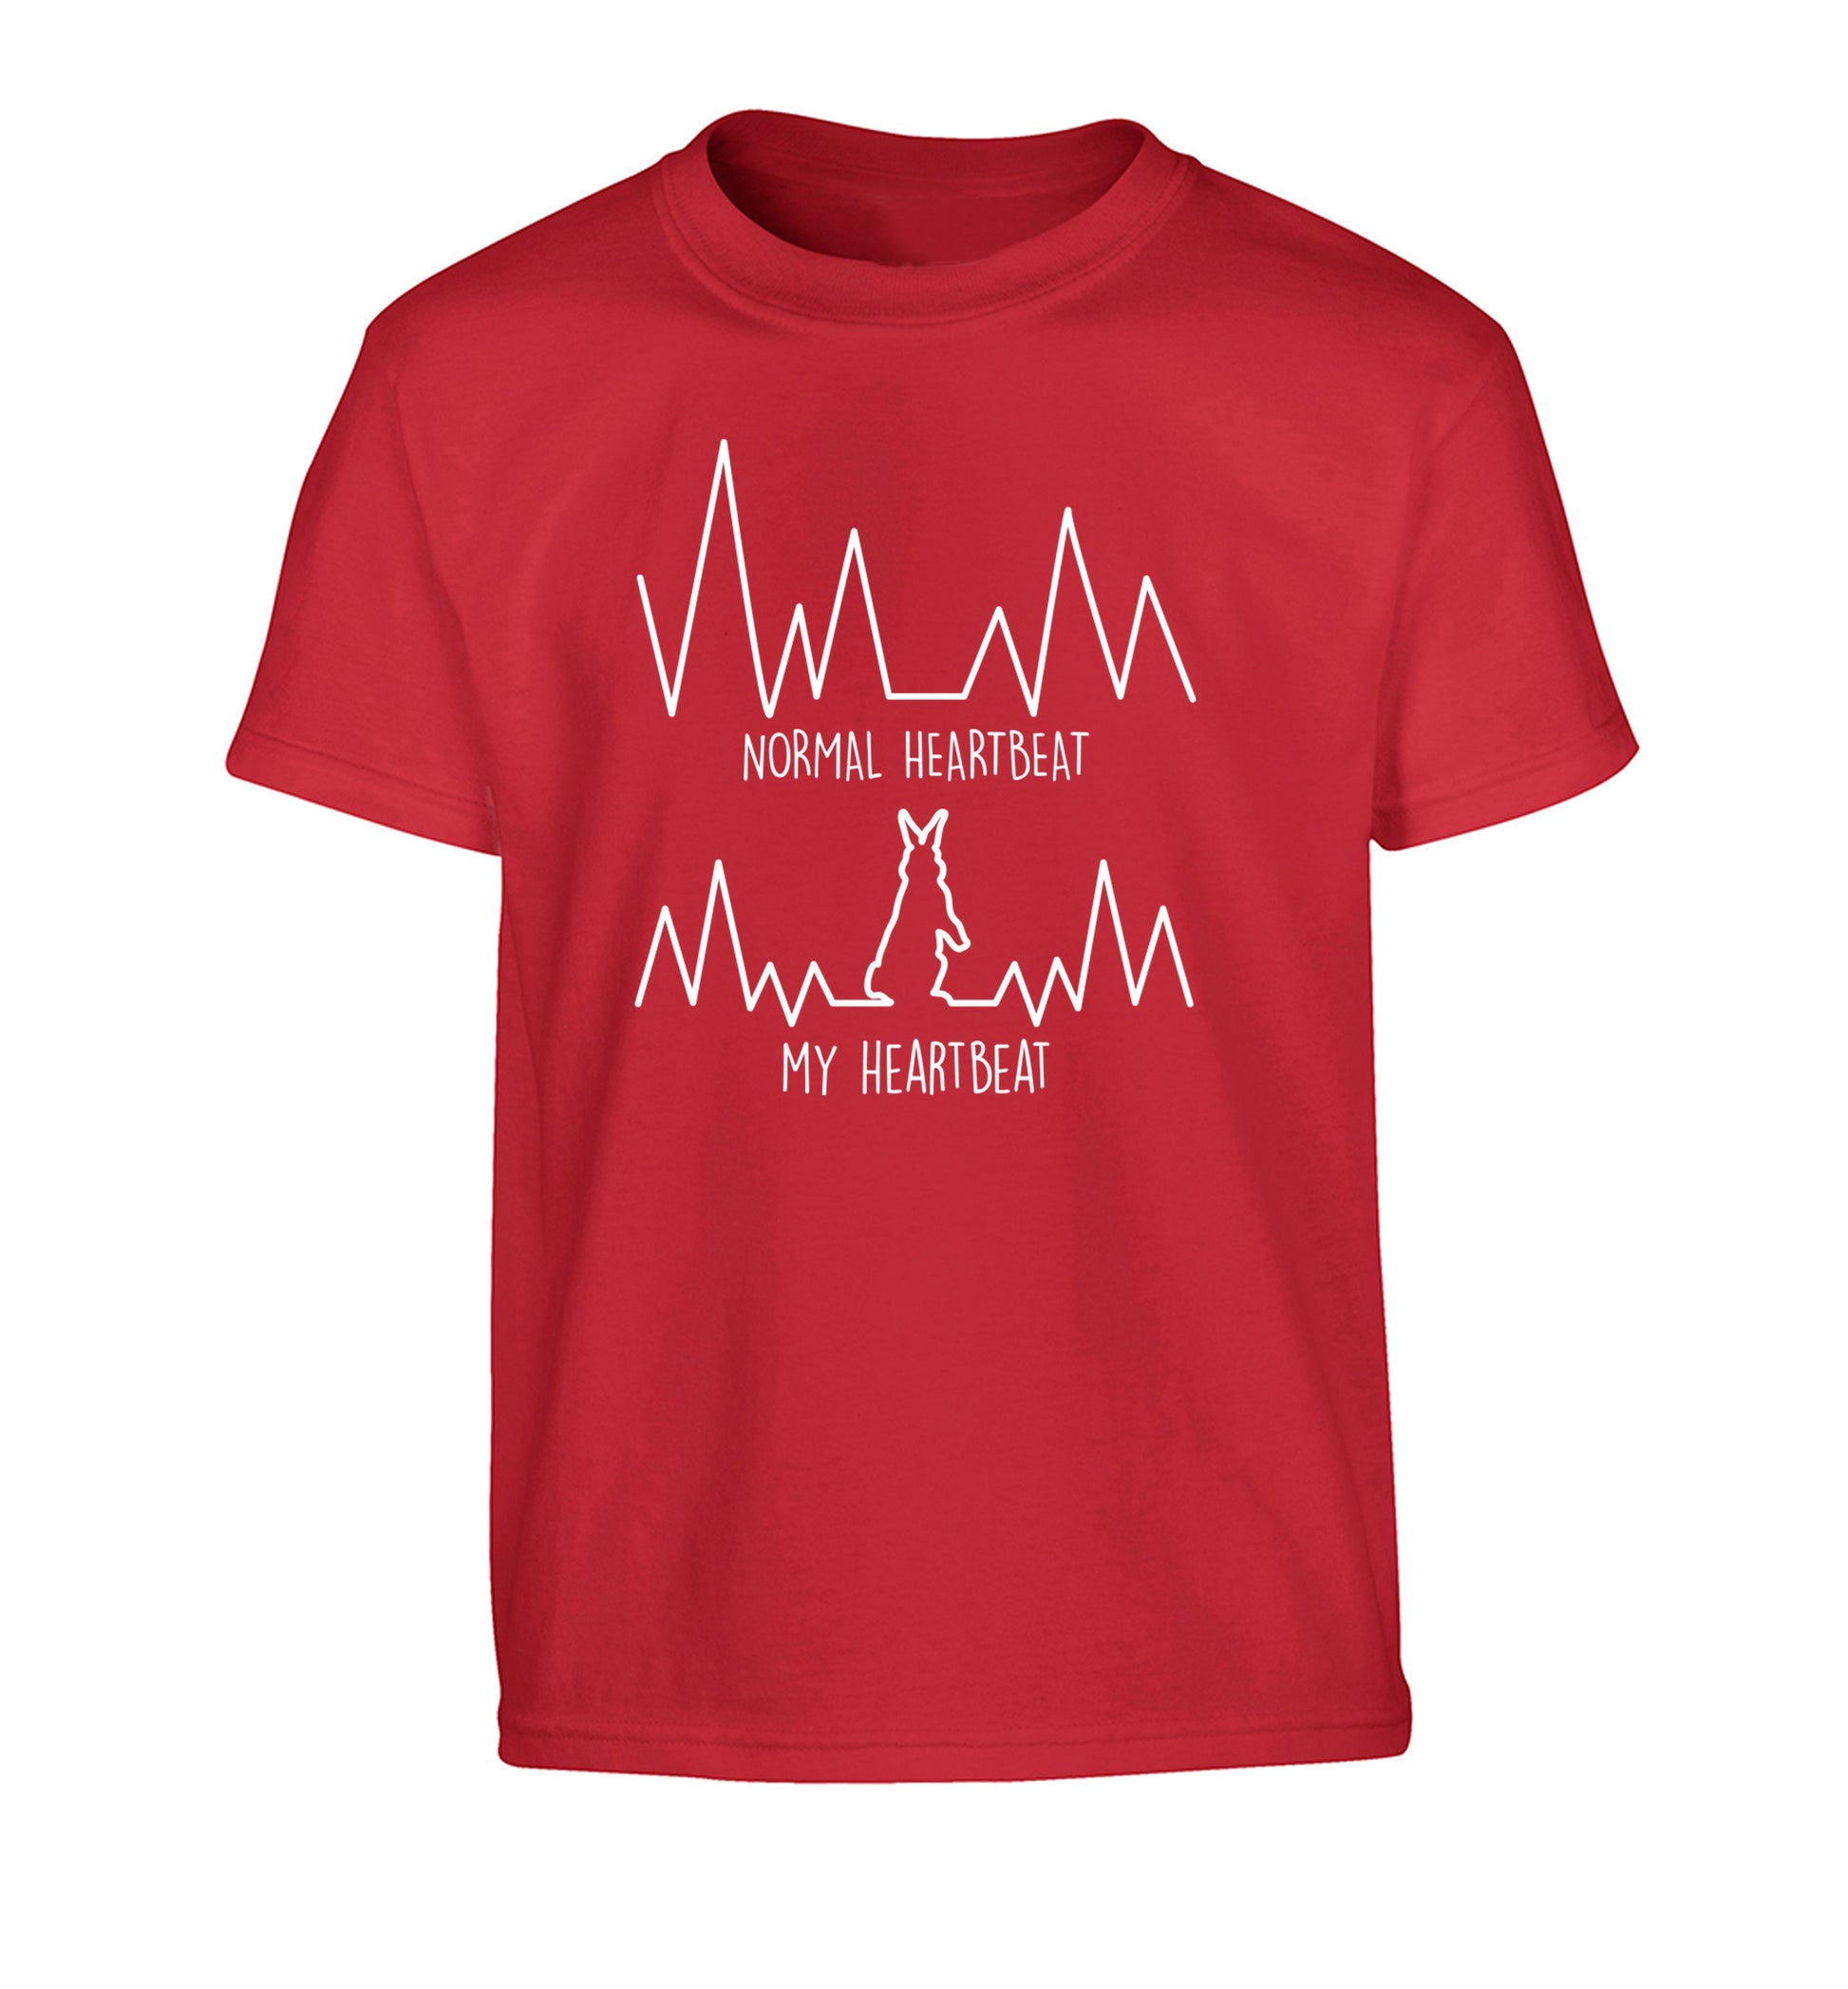 Normal heartbeat, my heartbeat rabbit lover Children's red Tshirt 12-14 Years